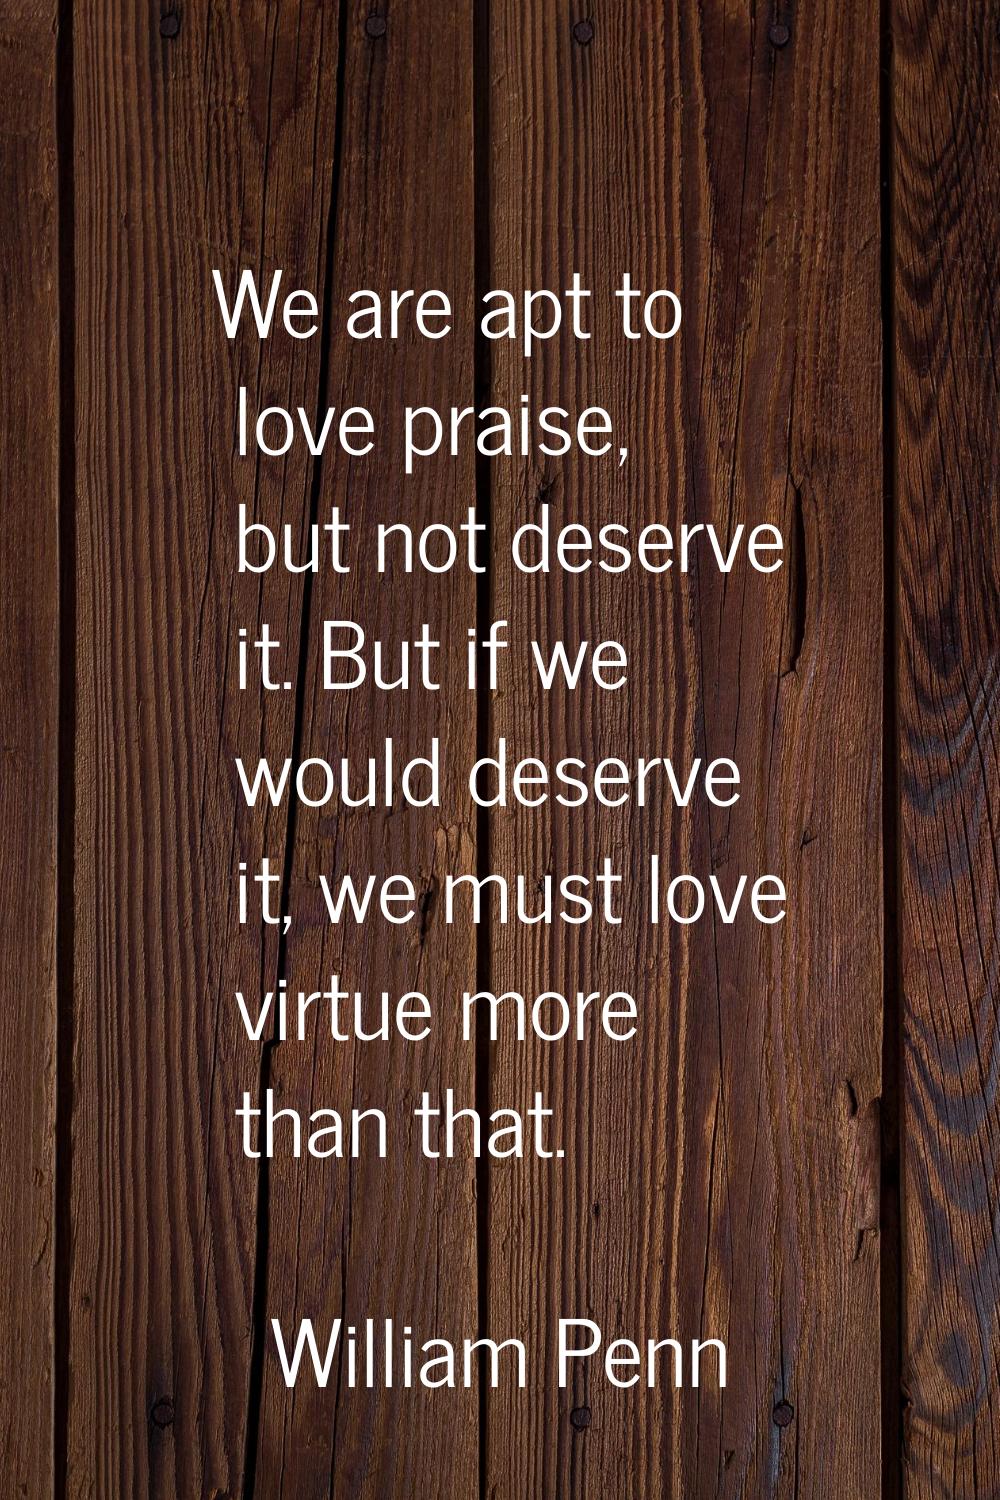 We are apt to love praise, but not deserve it. But if we would deserve it, we must love virtue more